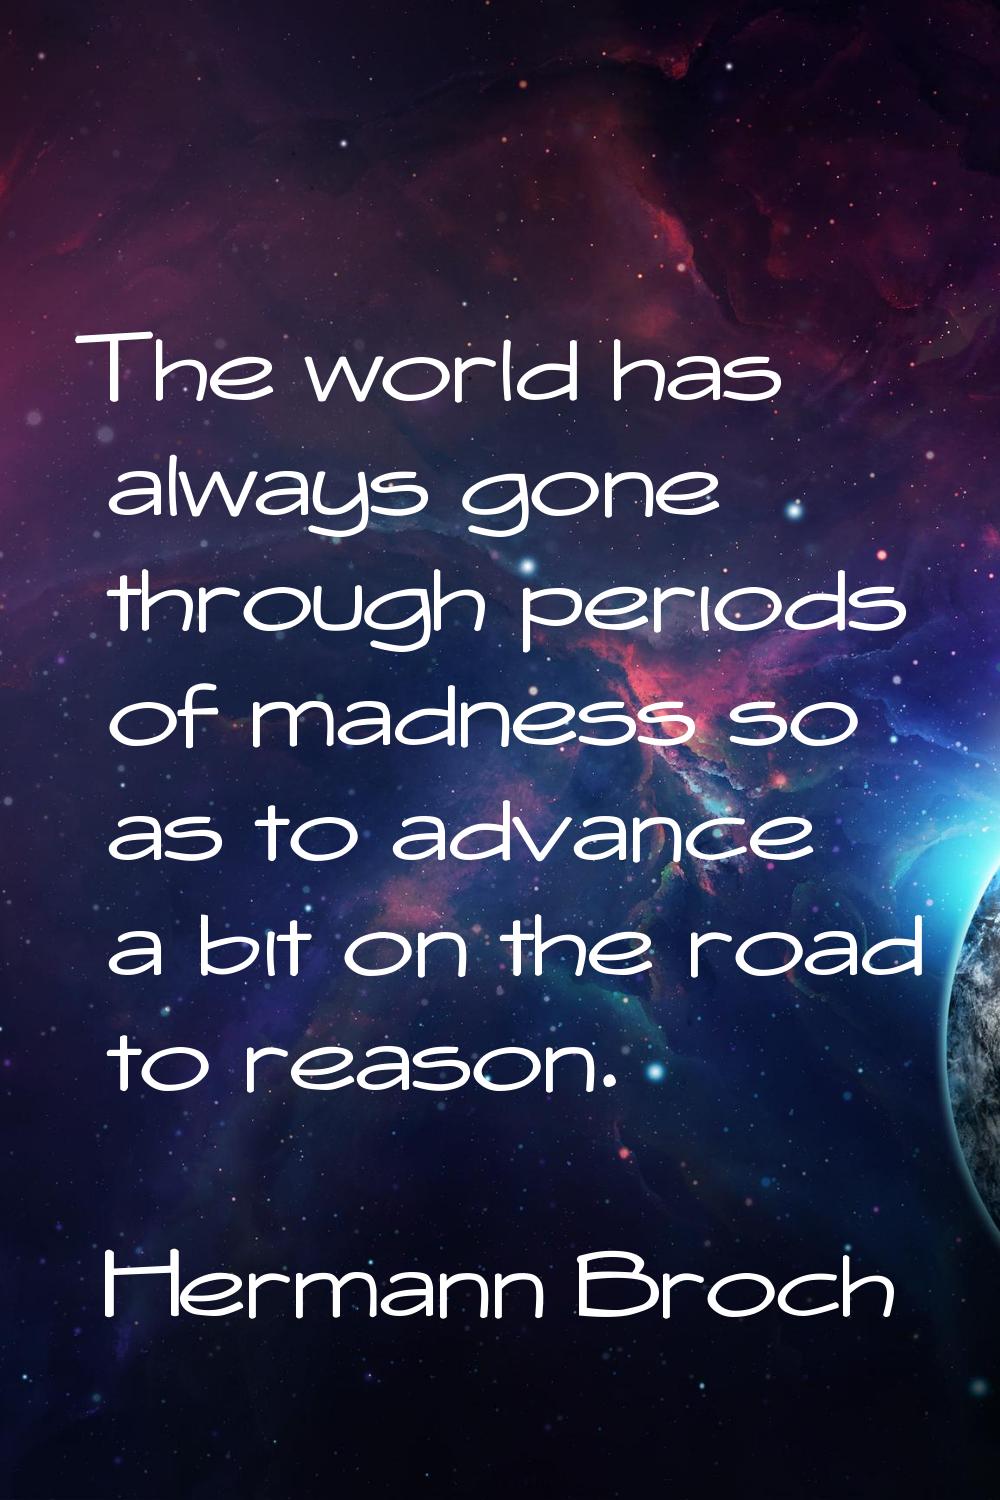 The world has always gone through periods of madness so as to advance a bit on the road to reason.